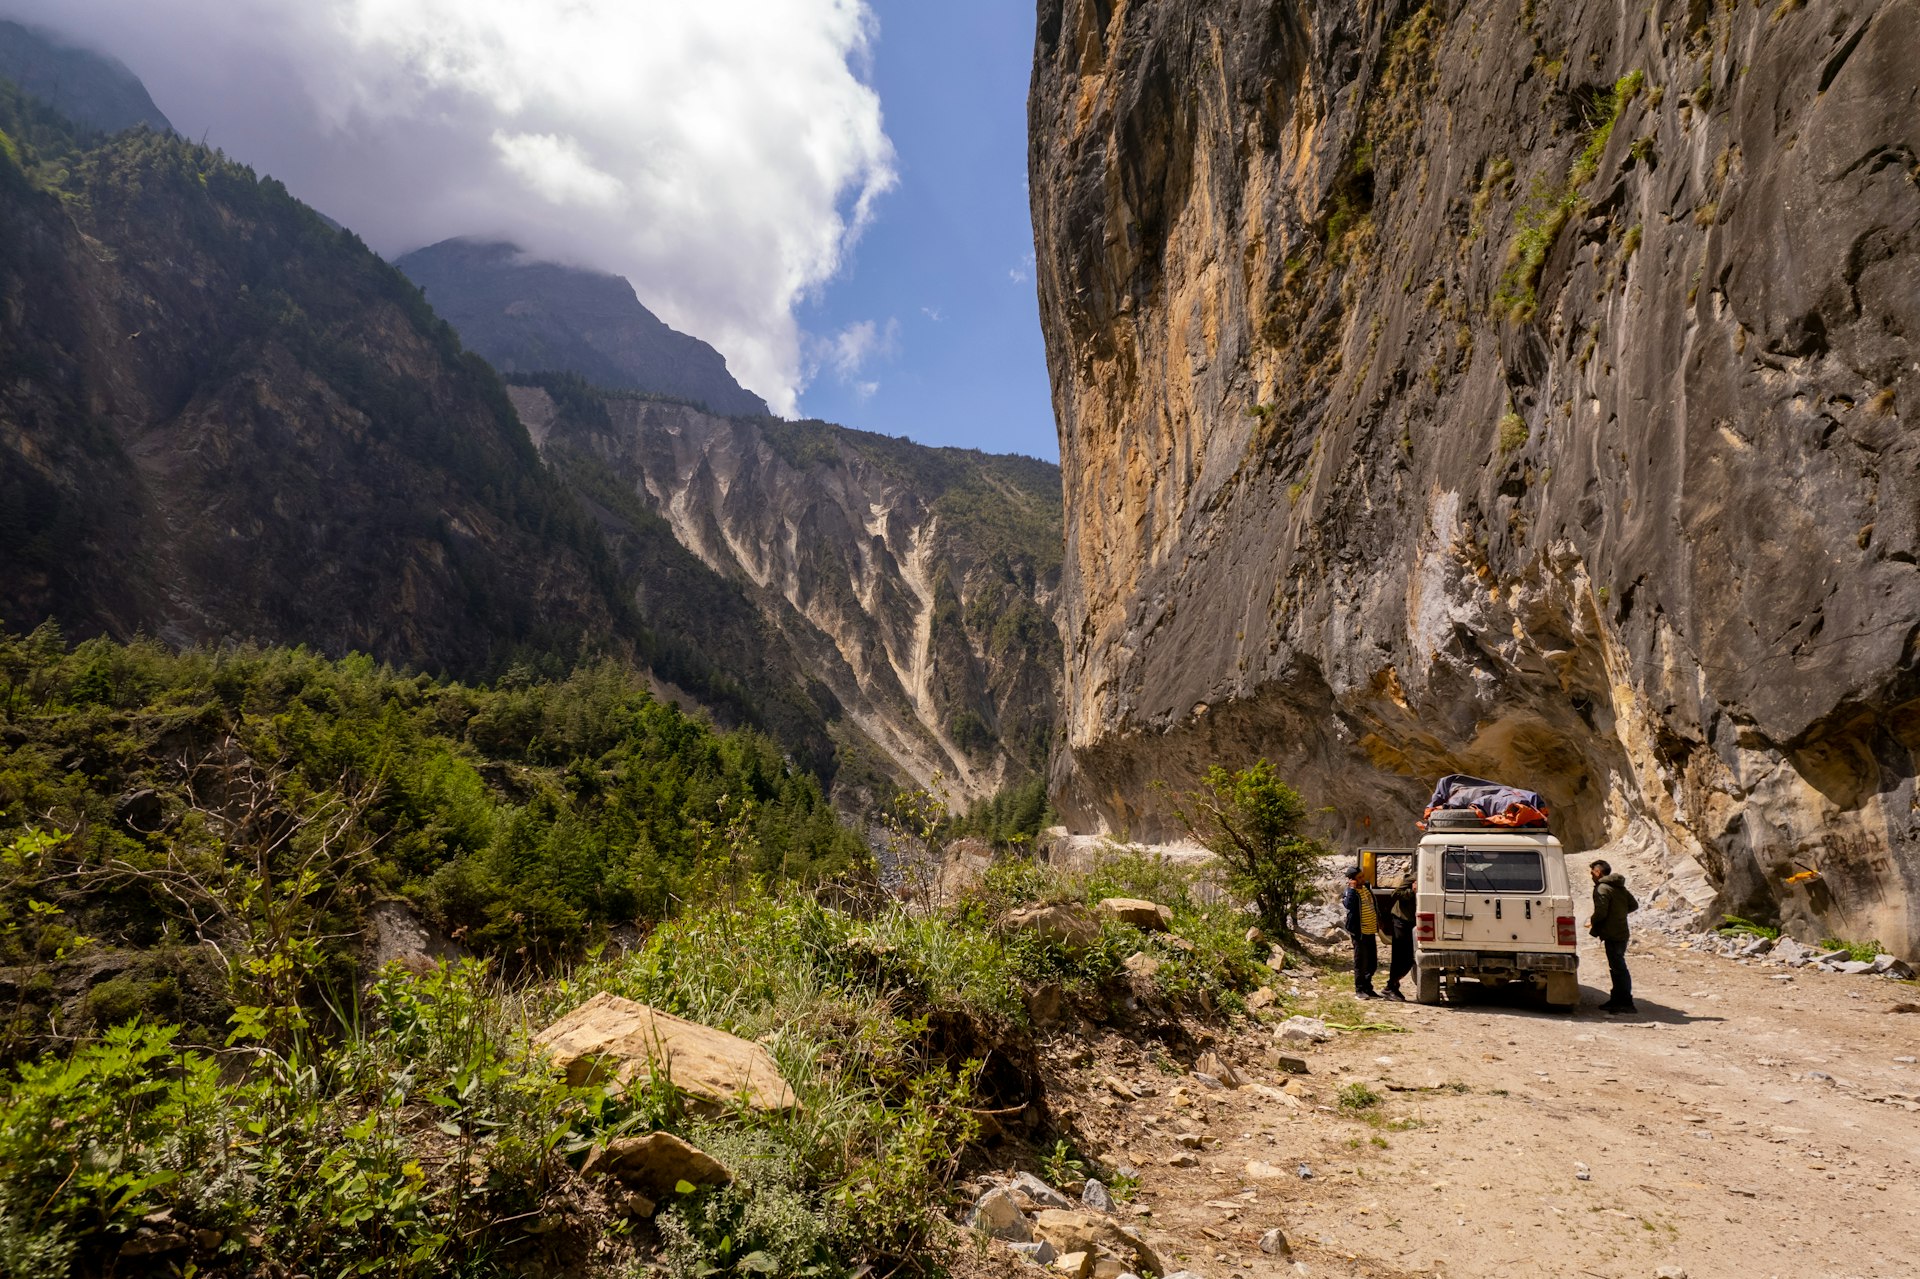 People stopping by their off-road vehicle during a drive through a mountain pass, Nepal